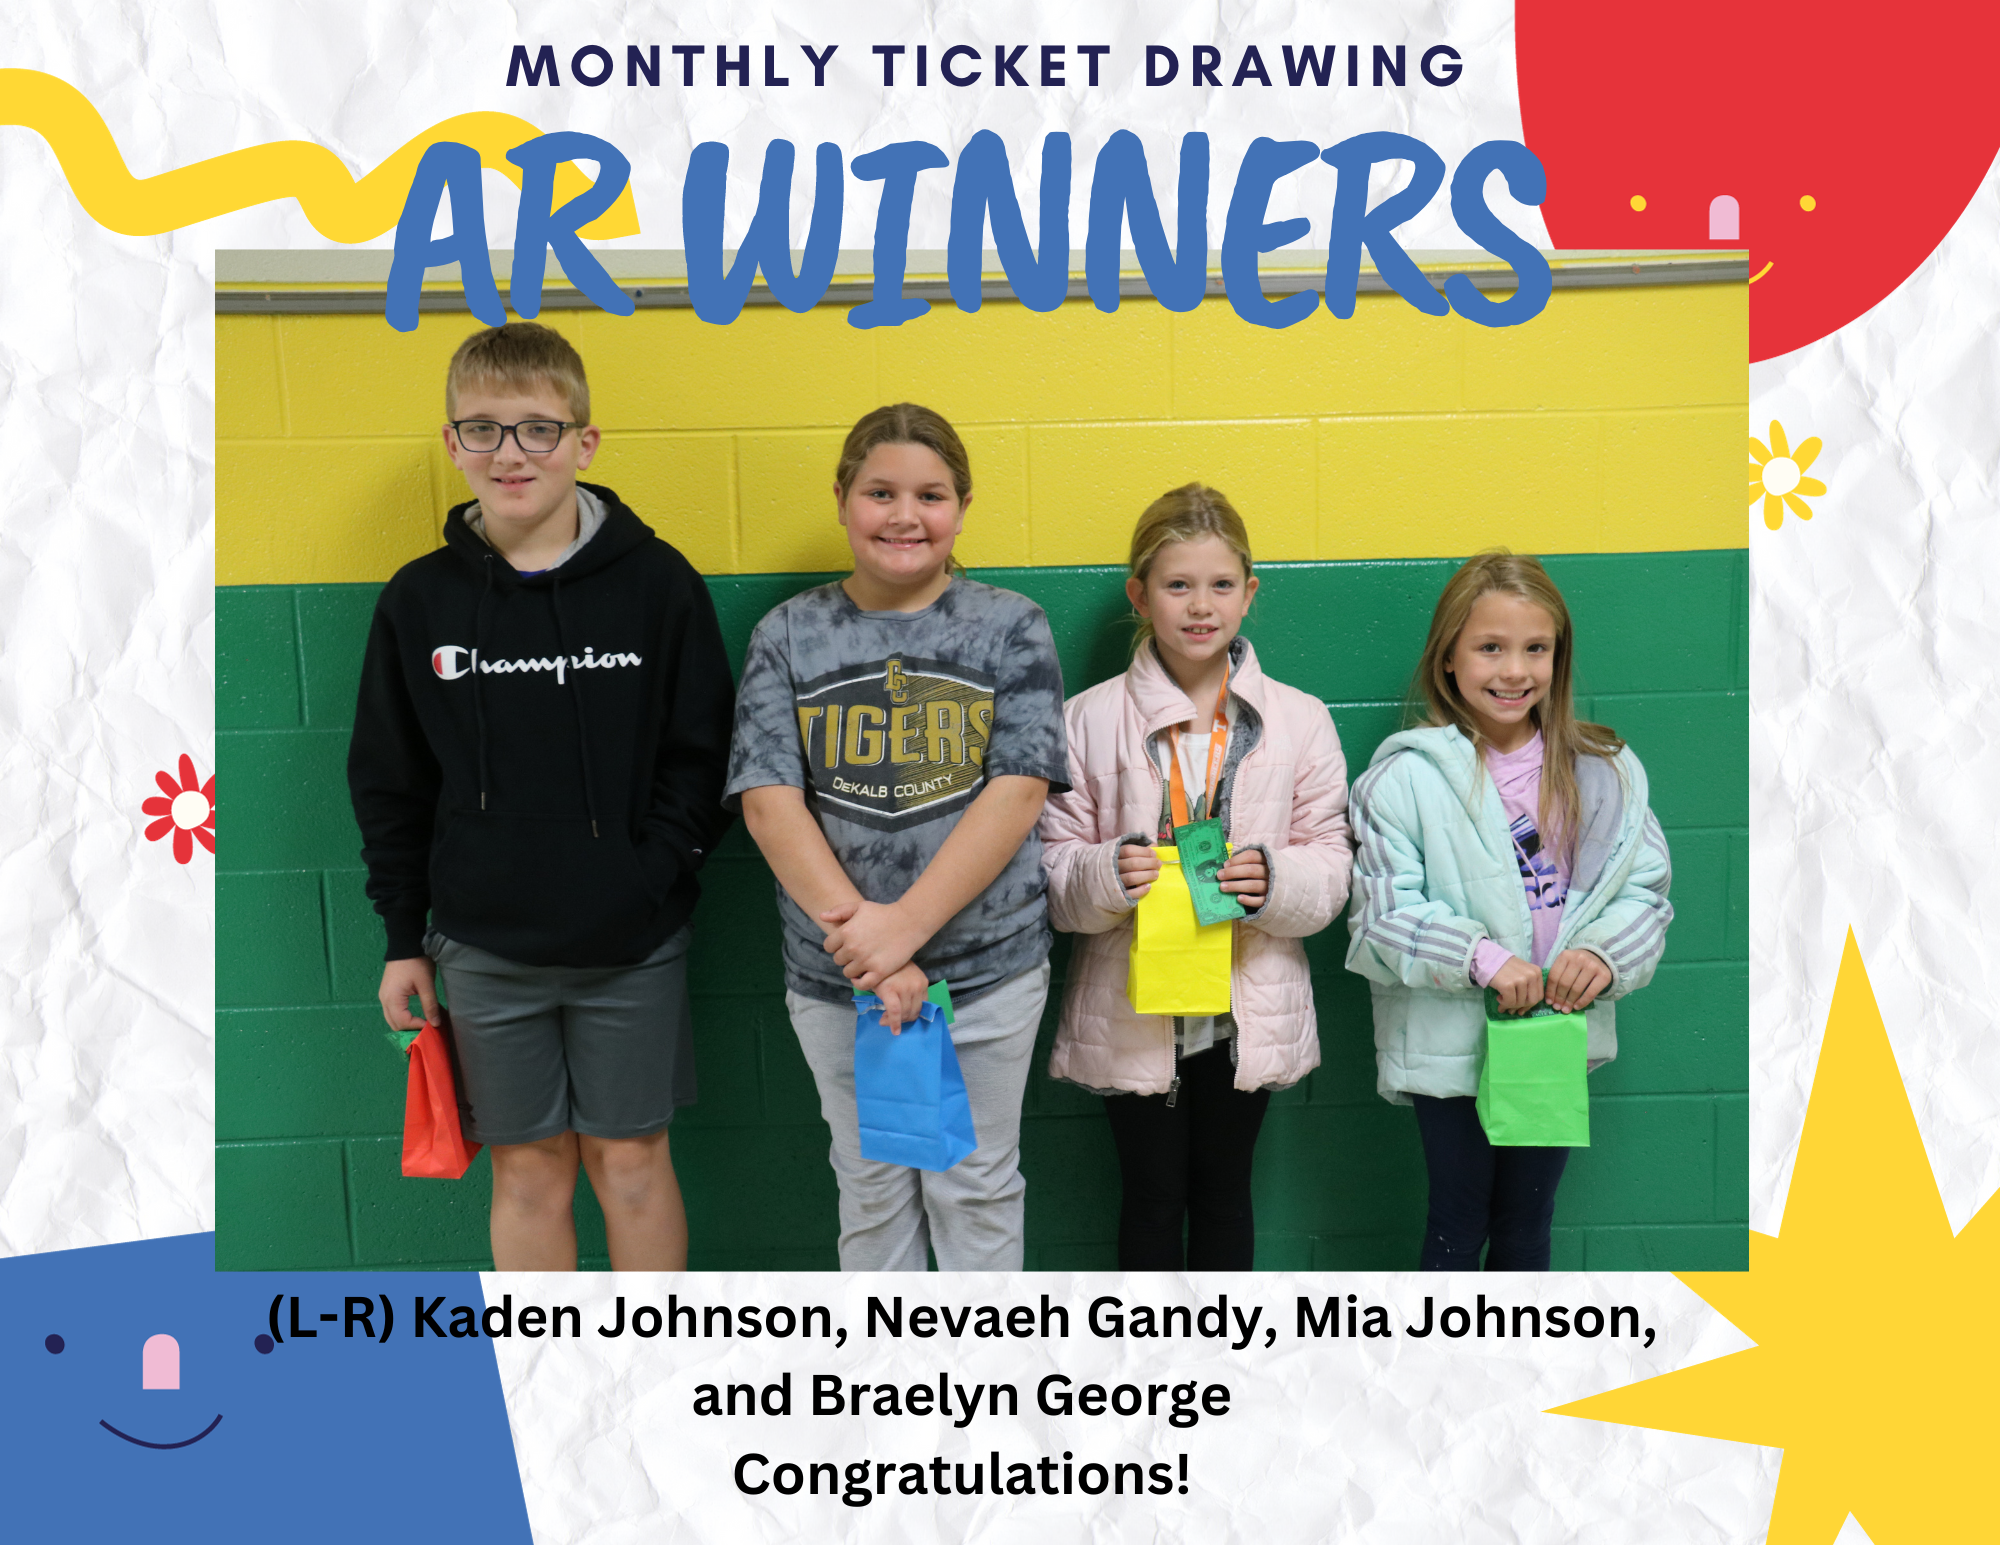 Monthly ticket drawing AR winners